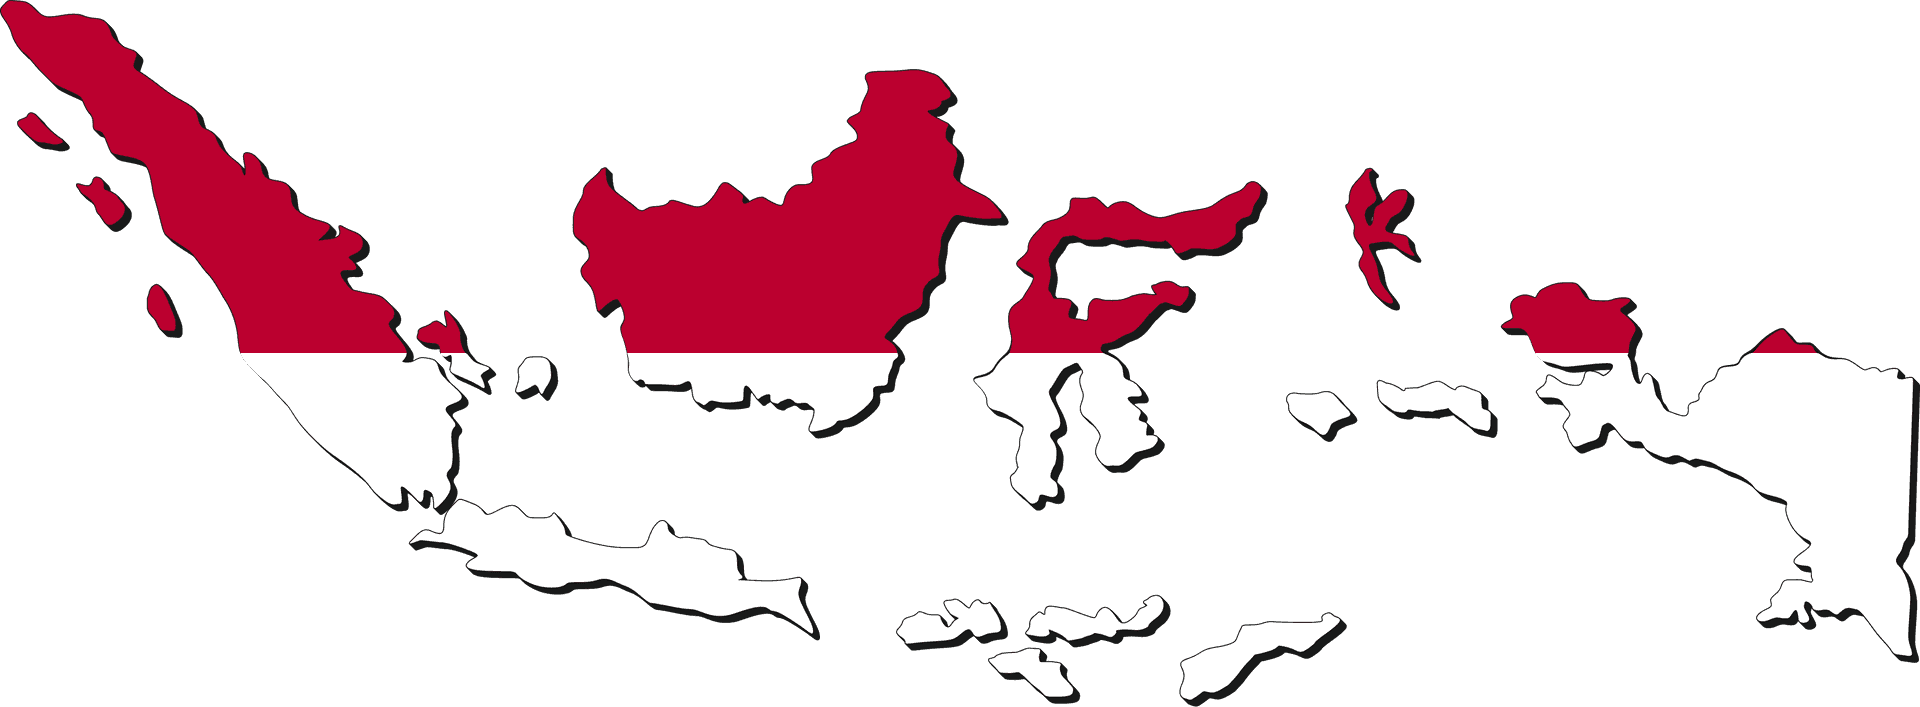 Indonesia Flag Map Silhouette PNG